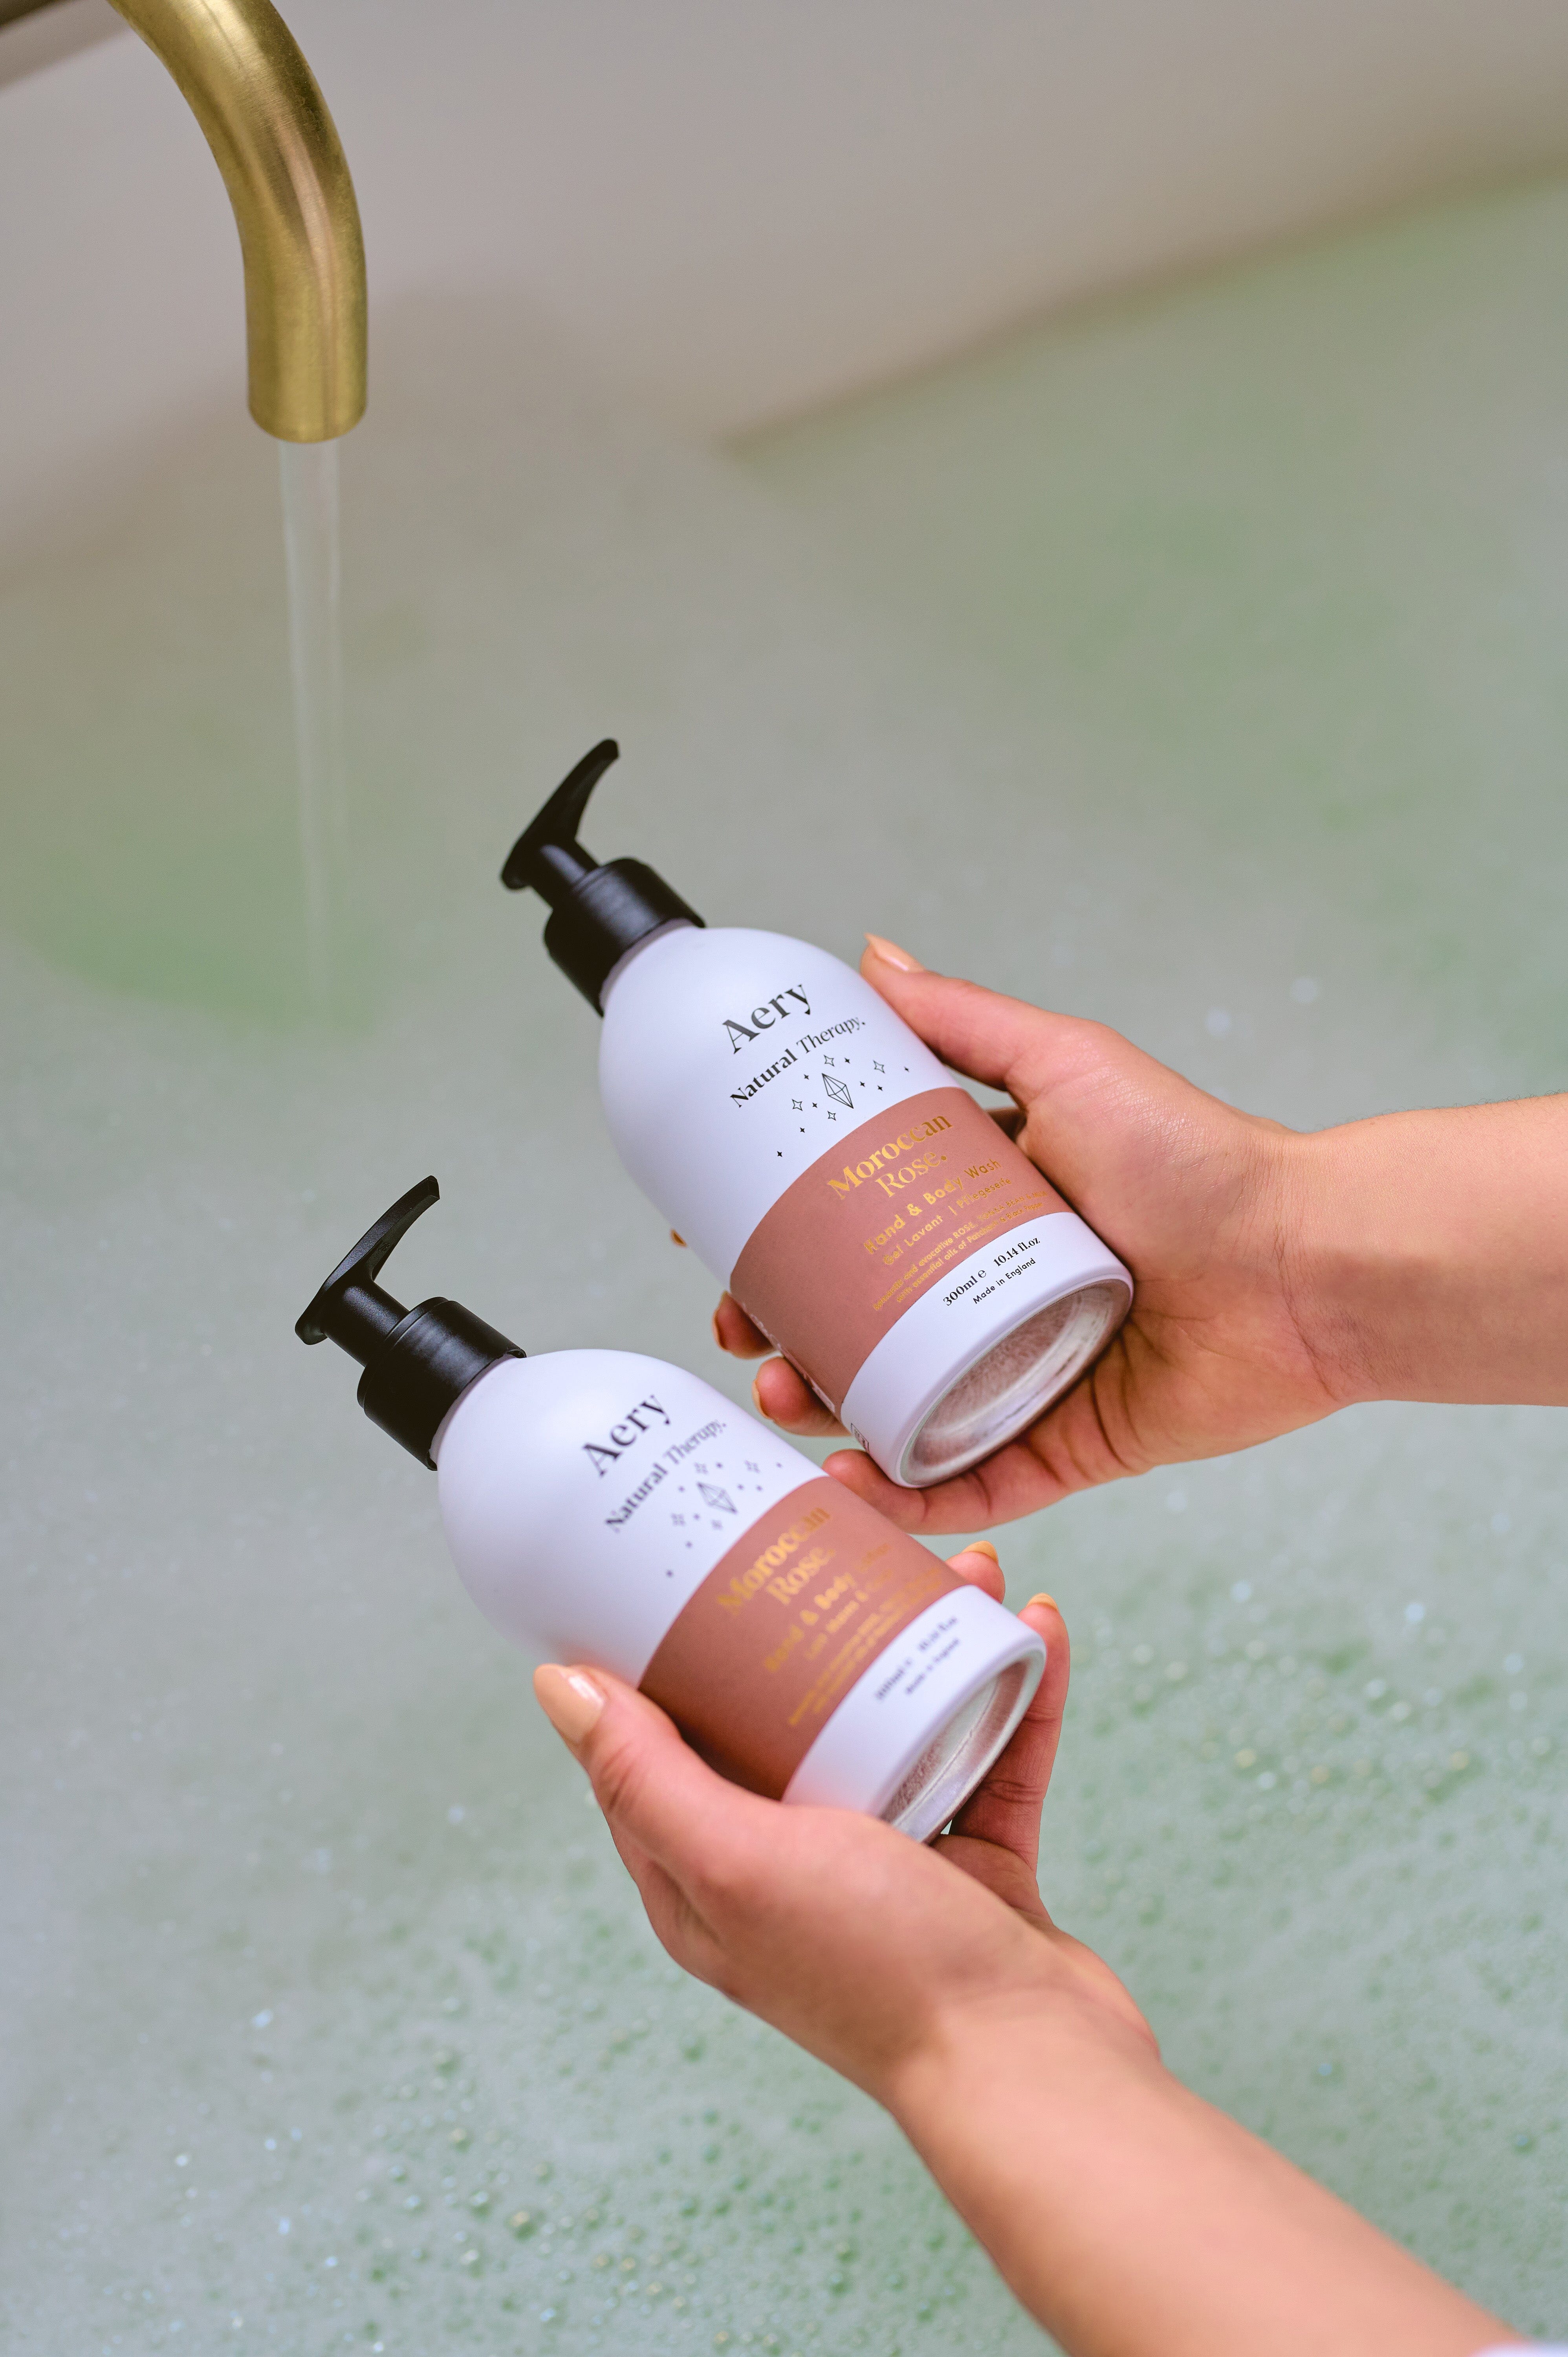 Aubergine Moroccan Rose hand and body wash and lotion duo by Aery displayed in hands over bubble bath 